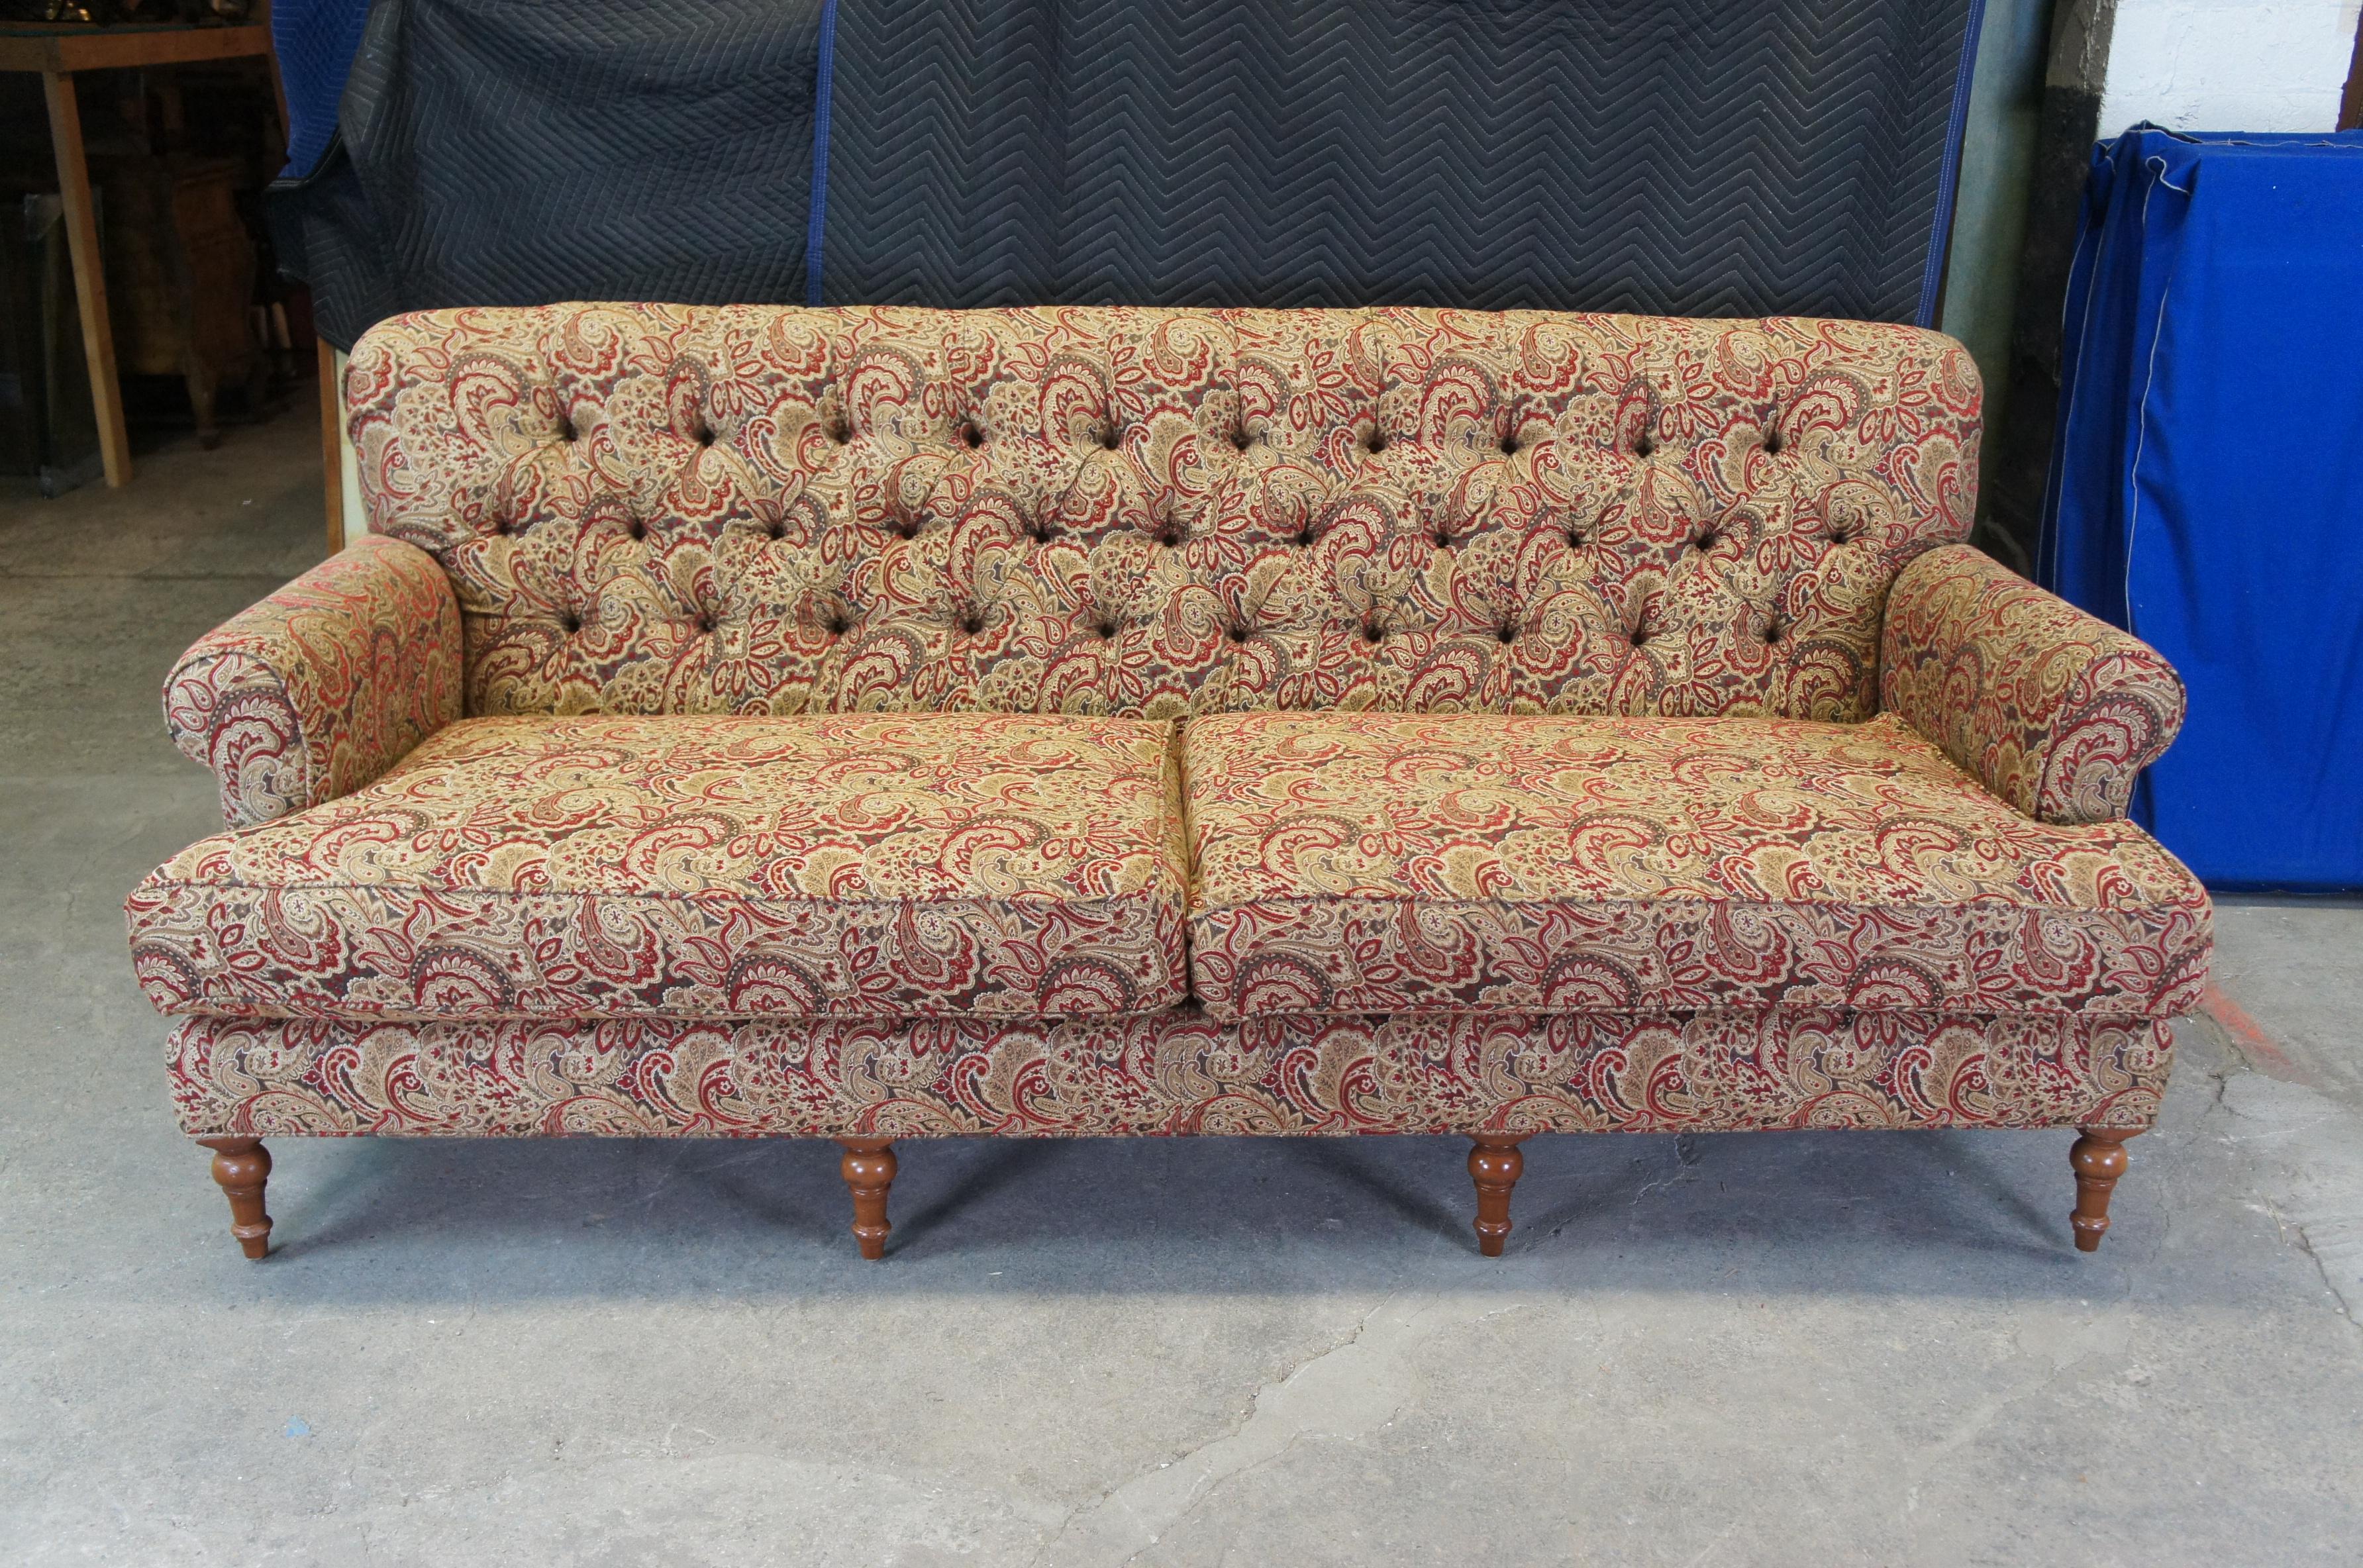 Vintage Arhaus Cambridge Collection Tufted Paisley Upholstered Sofa Couch 97 In Good Condition For Sale In Dayton, OH